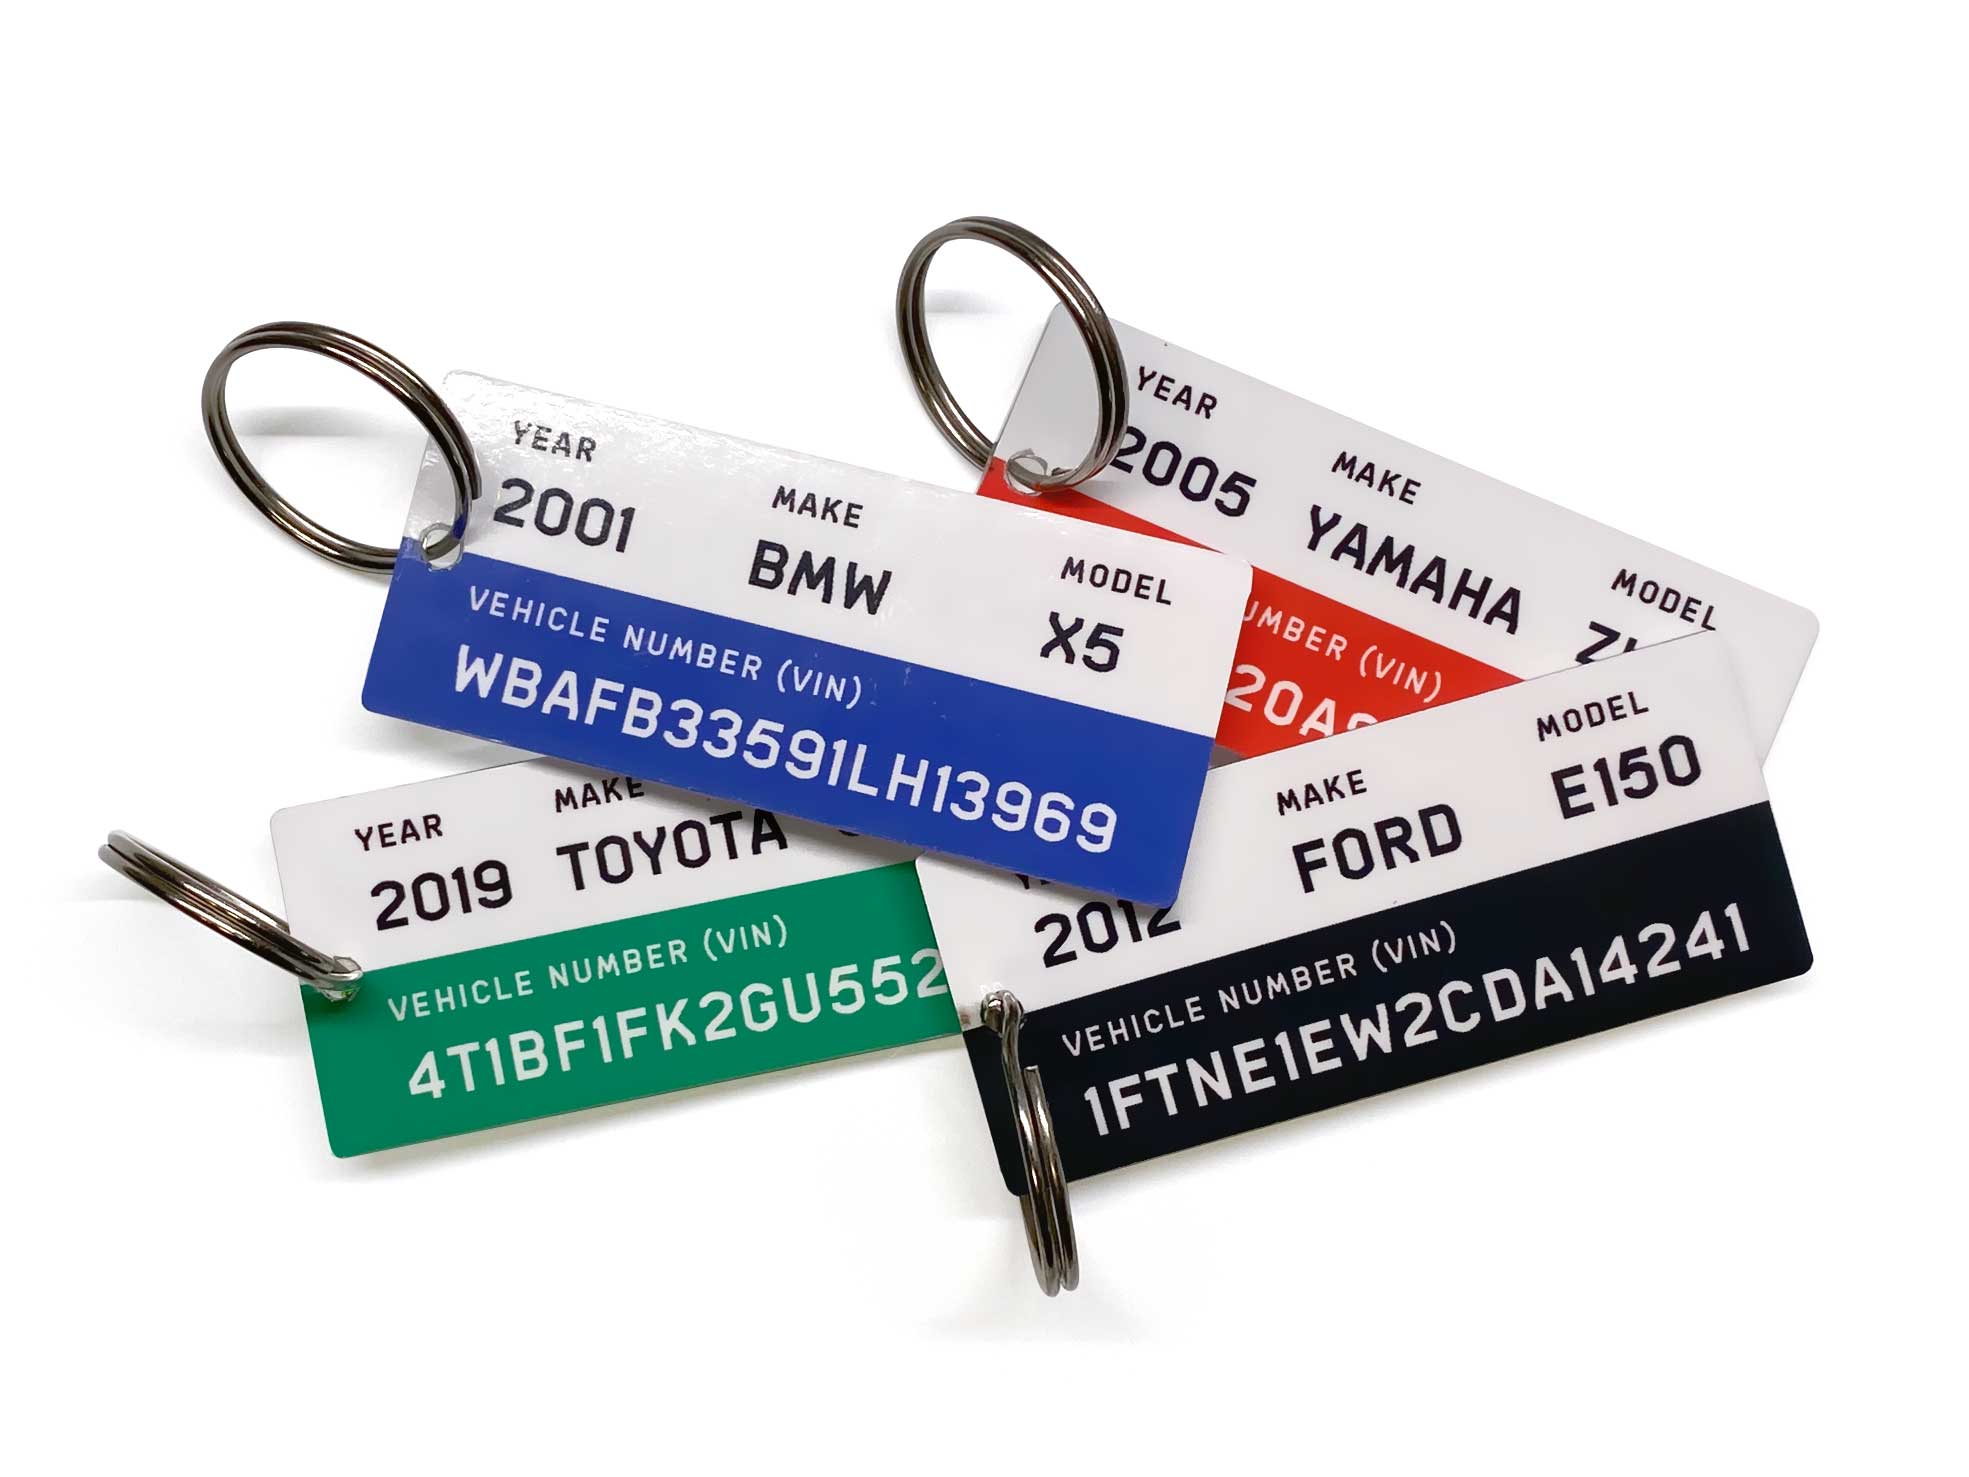 We offer key chains for vehicle owners, car enthusiasts and dealerships. Key ring tag has vehicle identification number (vin), manufacturing year, make and model.